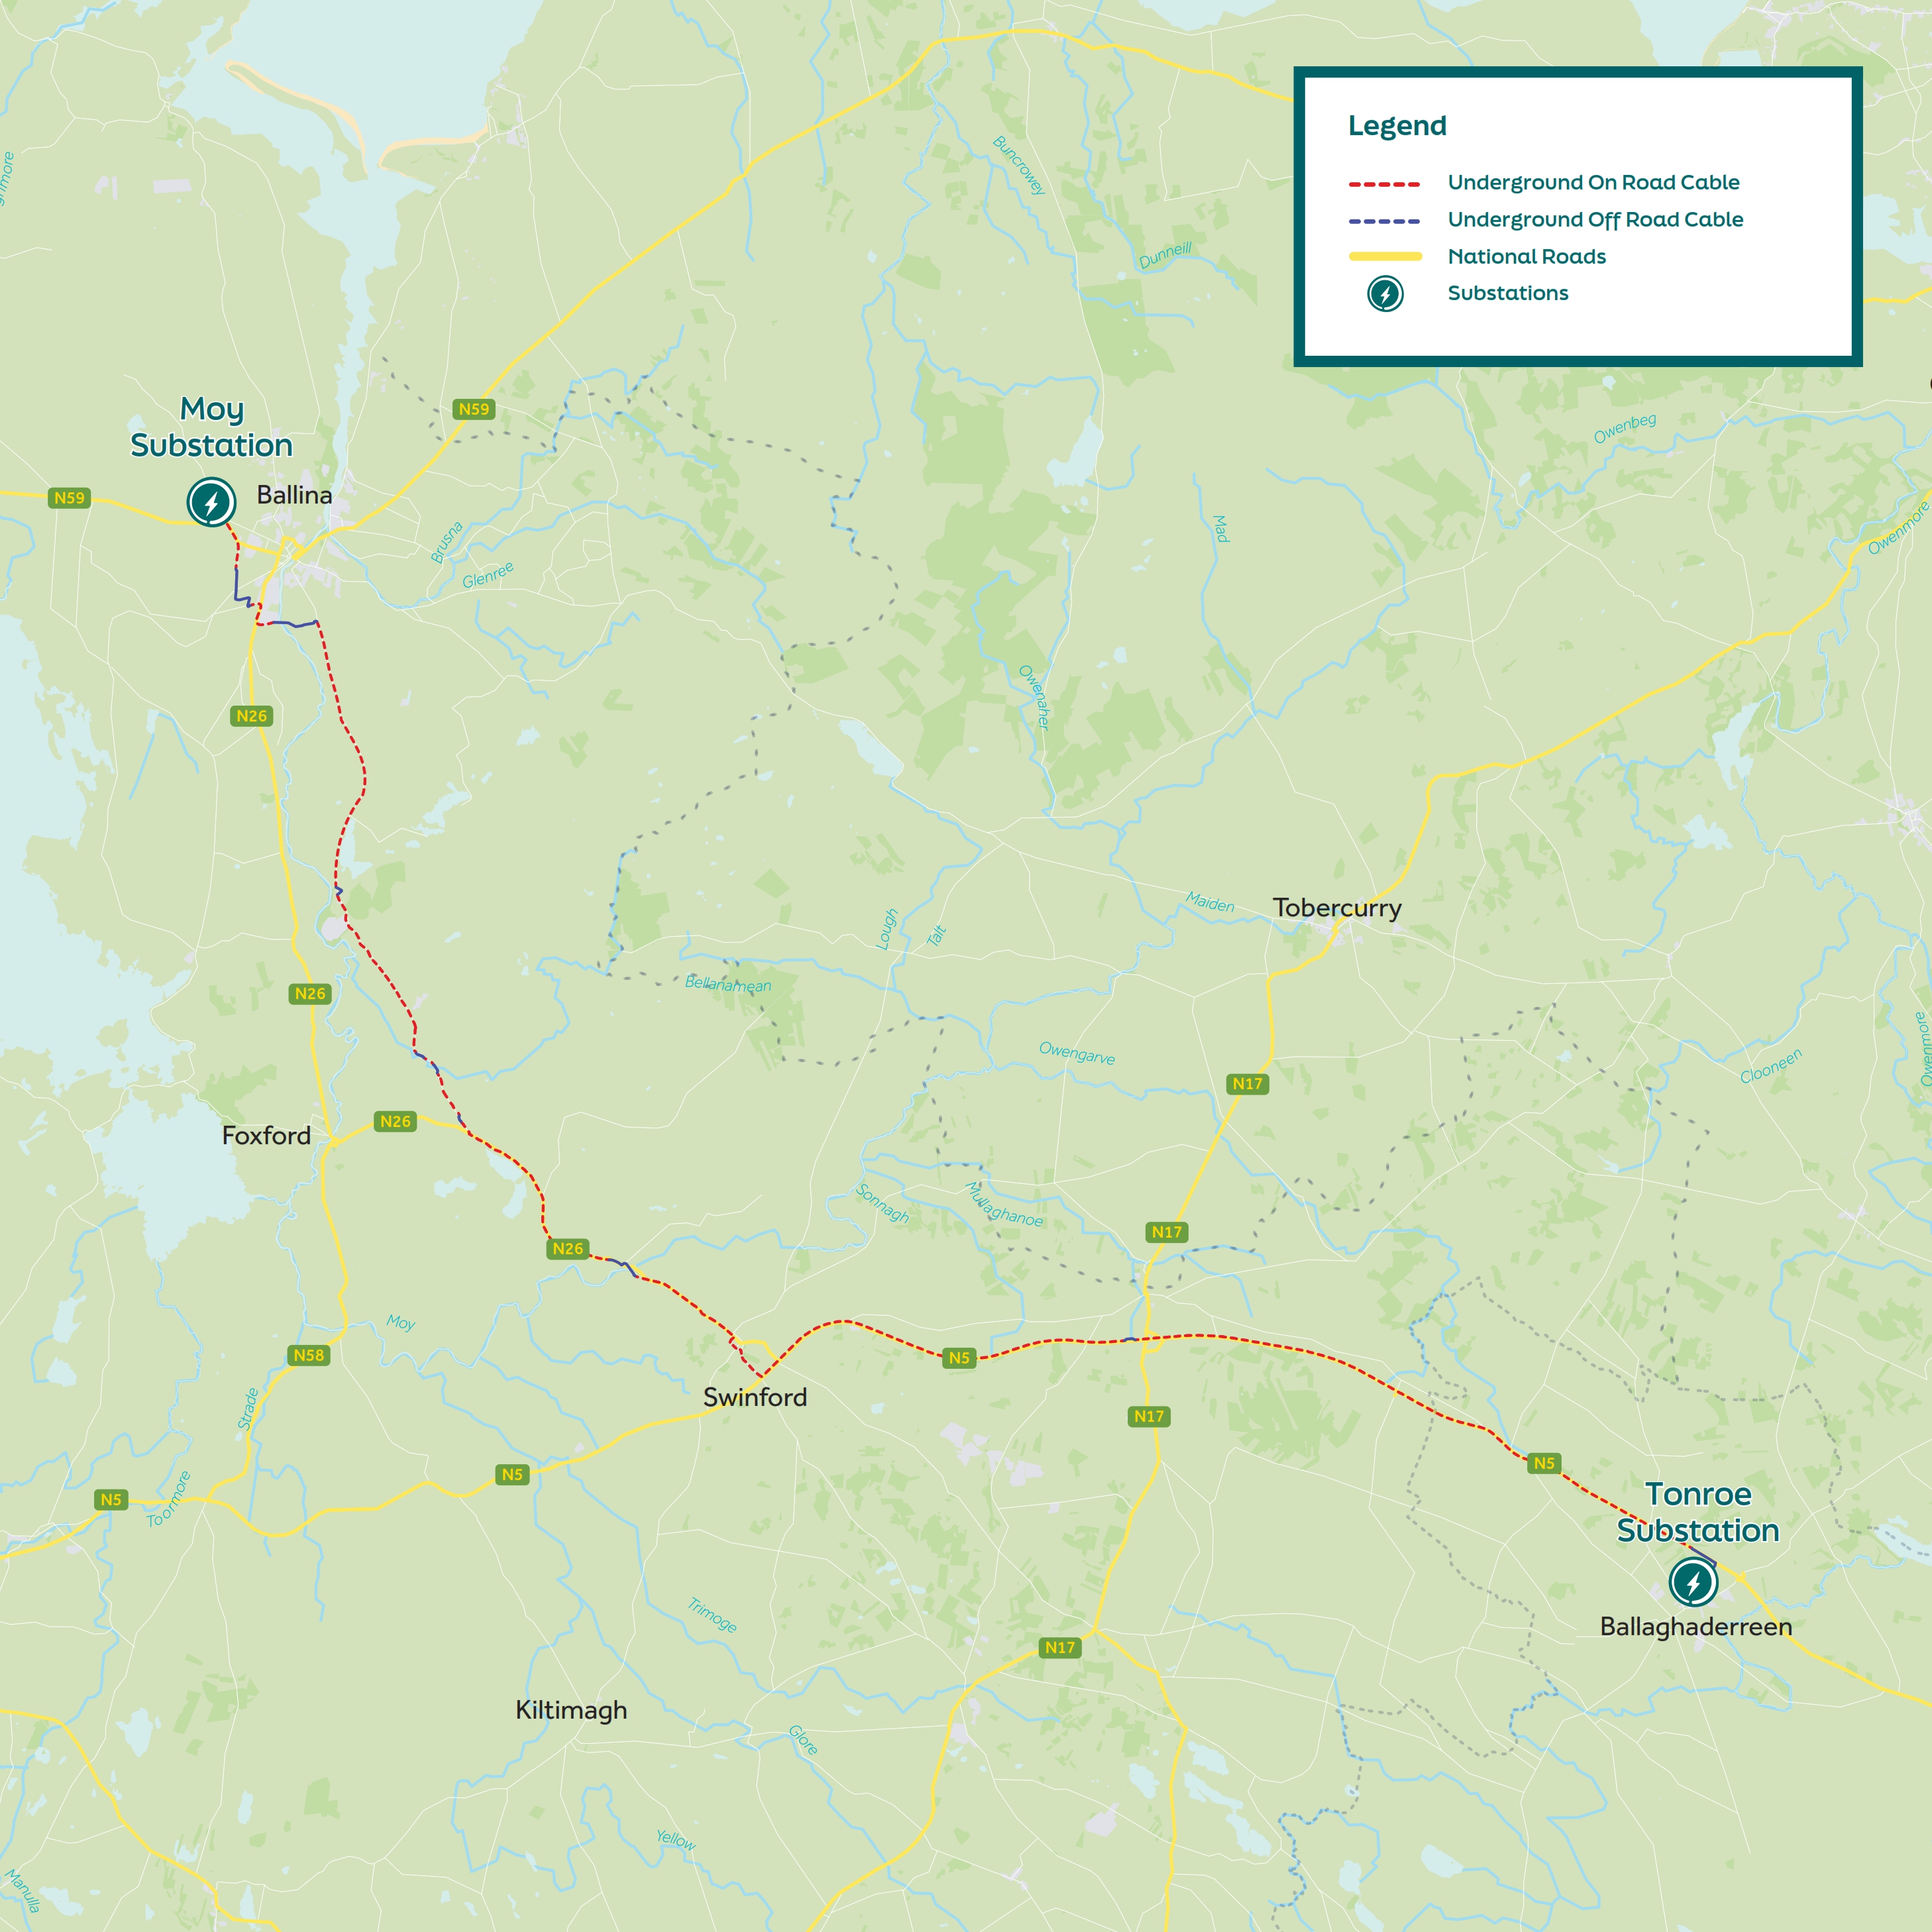 North Connacht project area